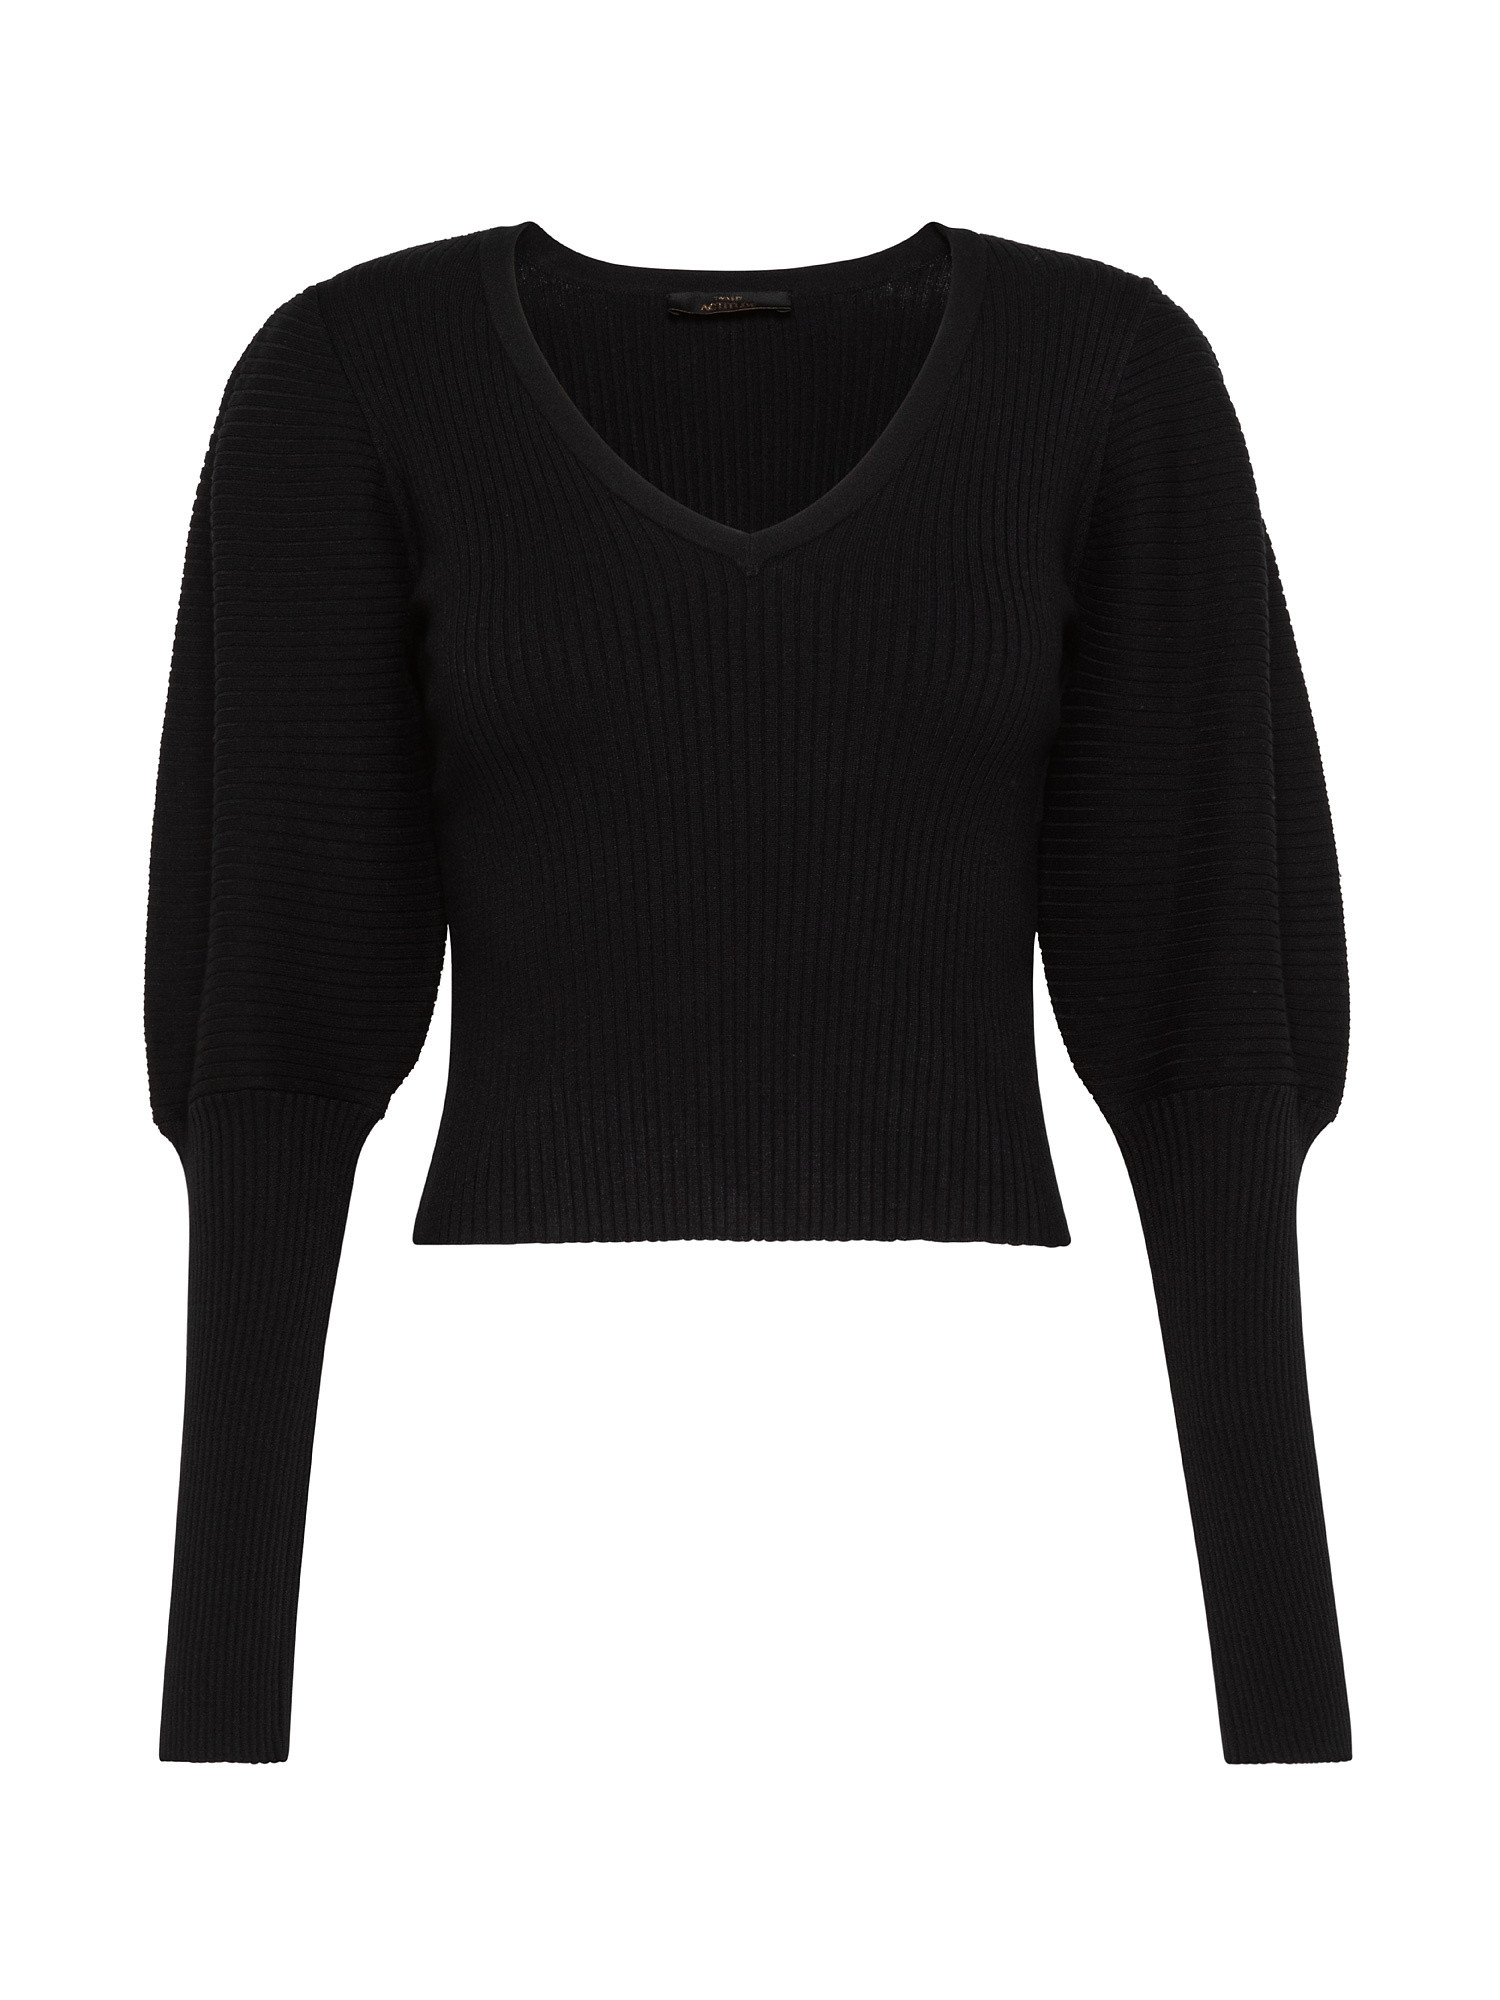 'Garnet' sweater with balloon sleeves, Black, large image number 0